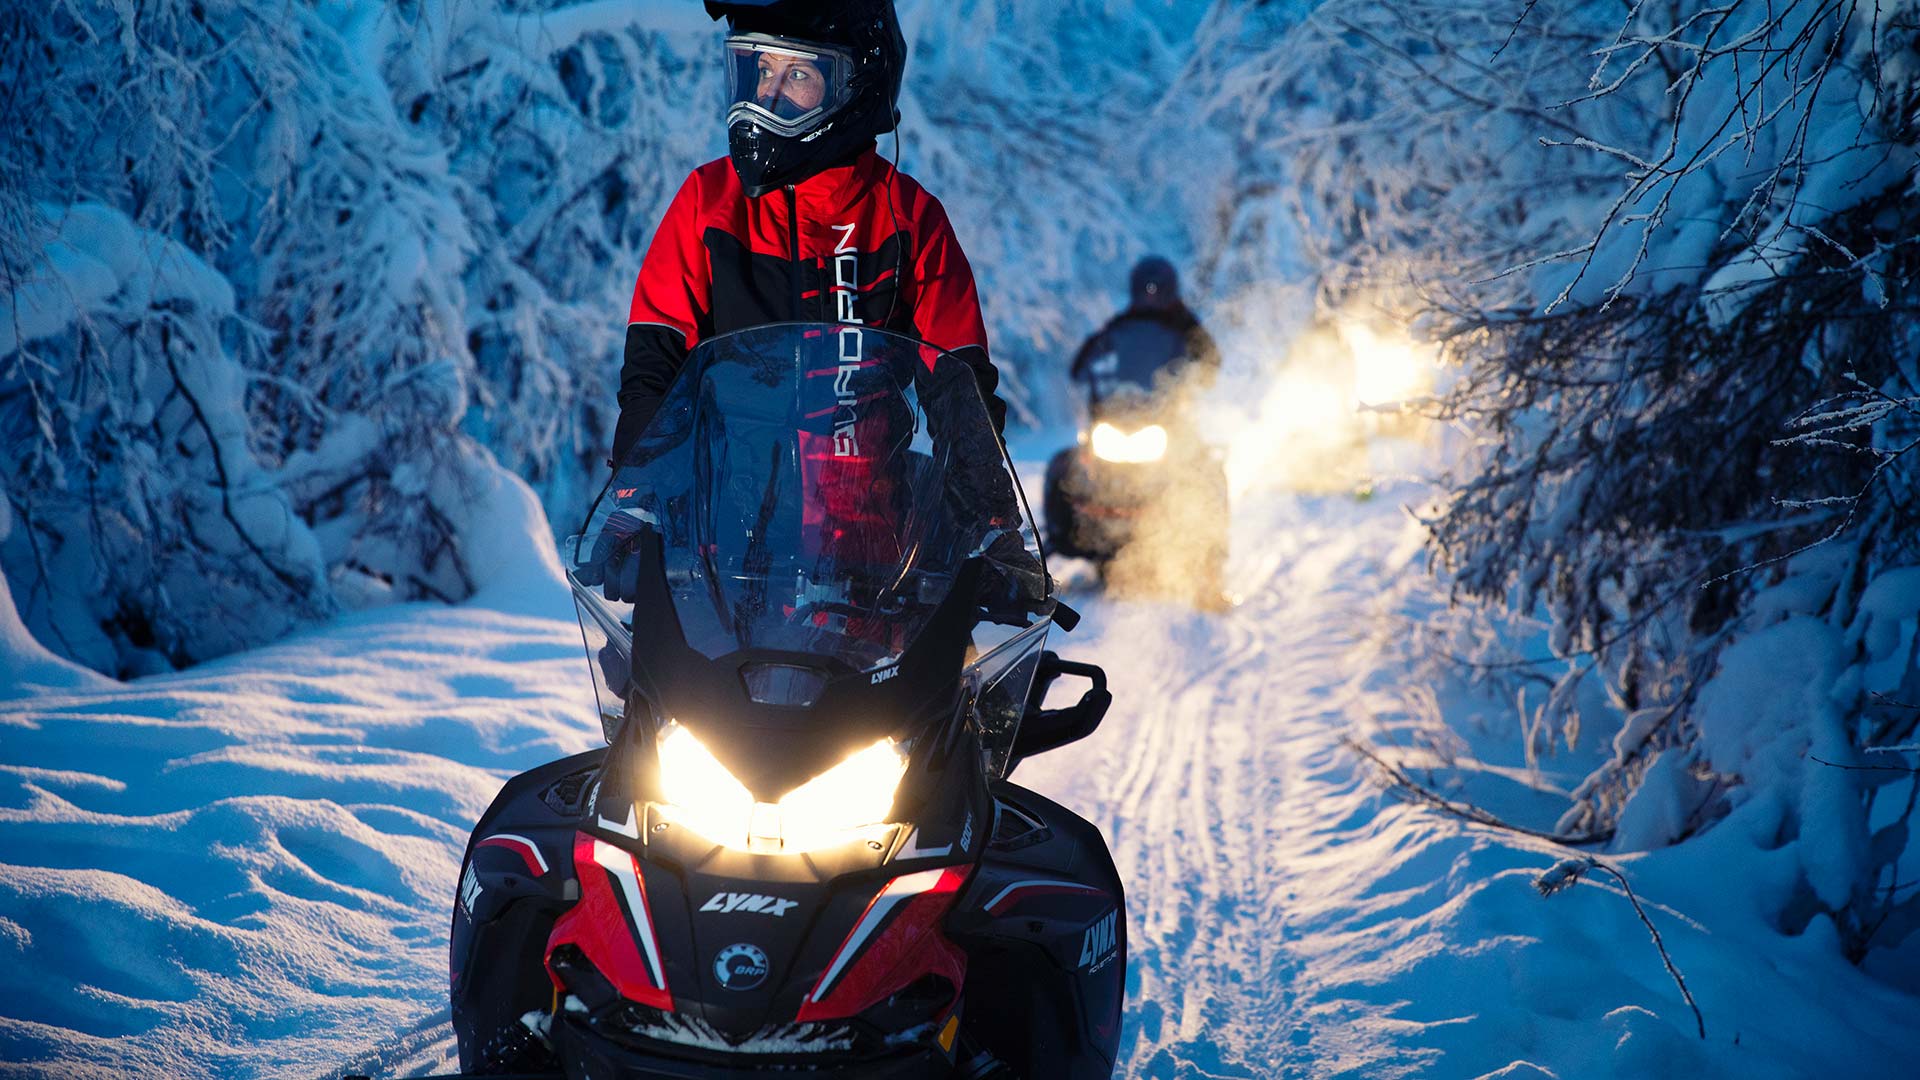 BRP Introduces Lynx Snowmobiles to North America